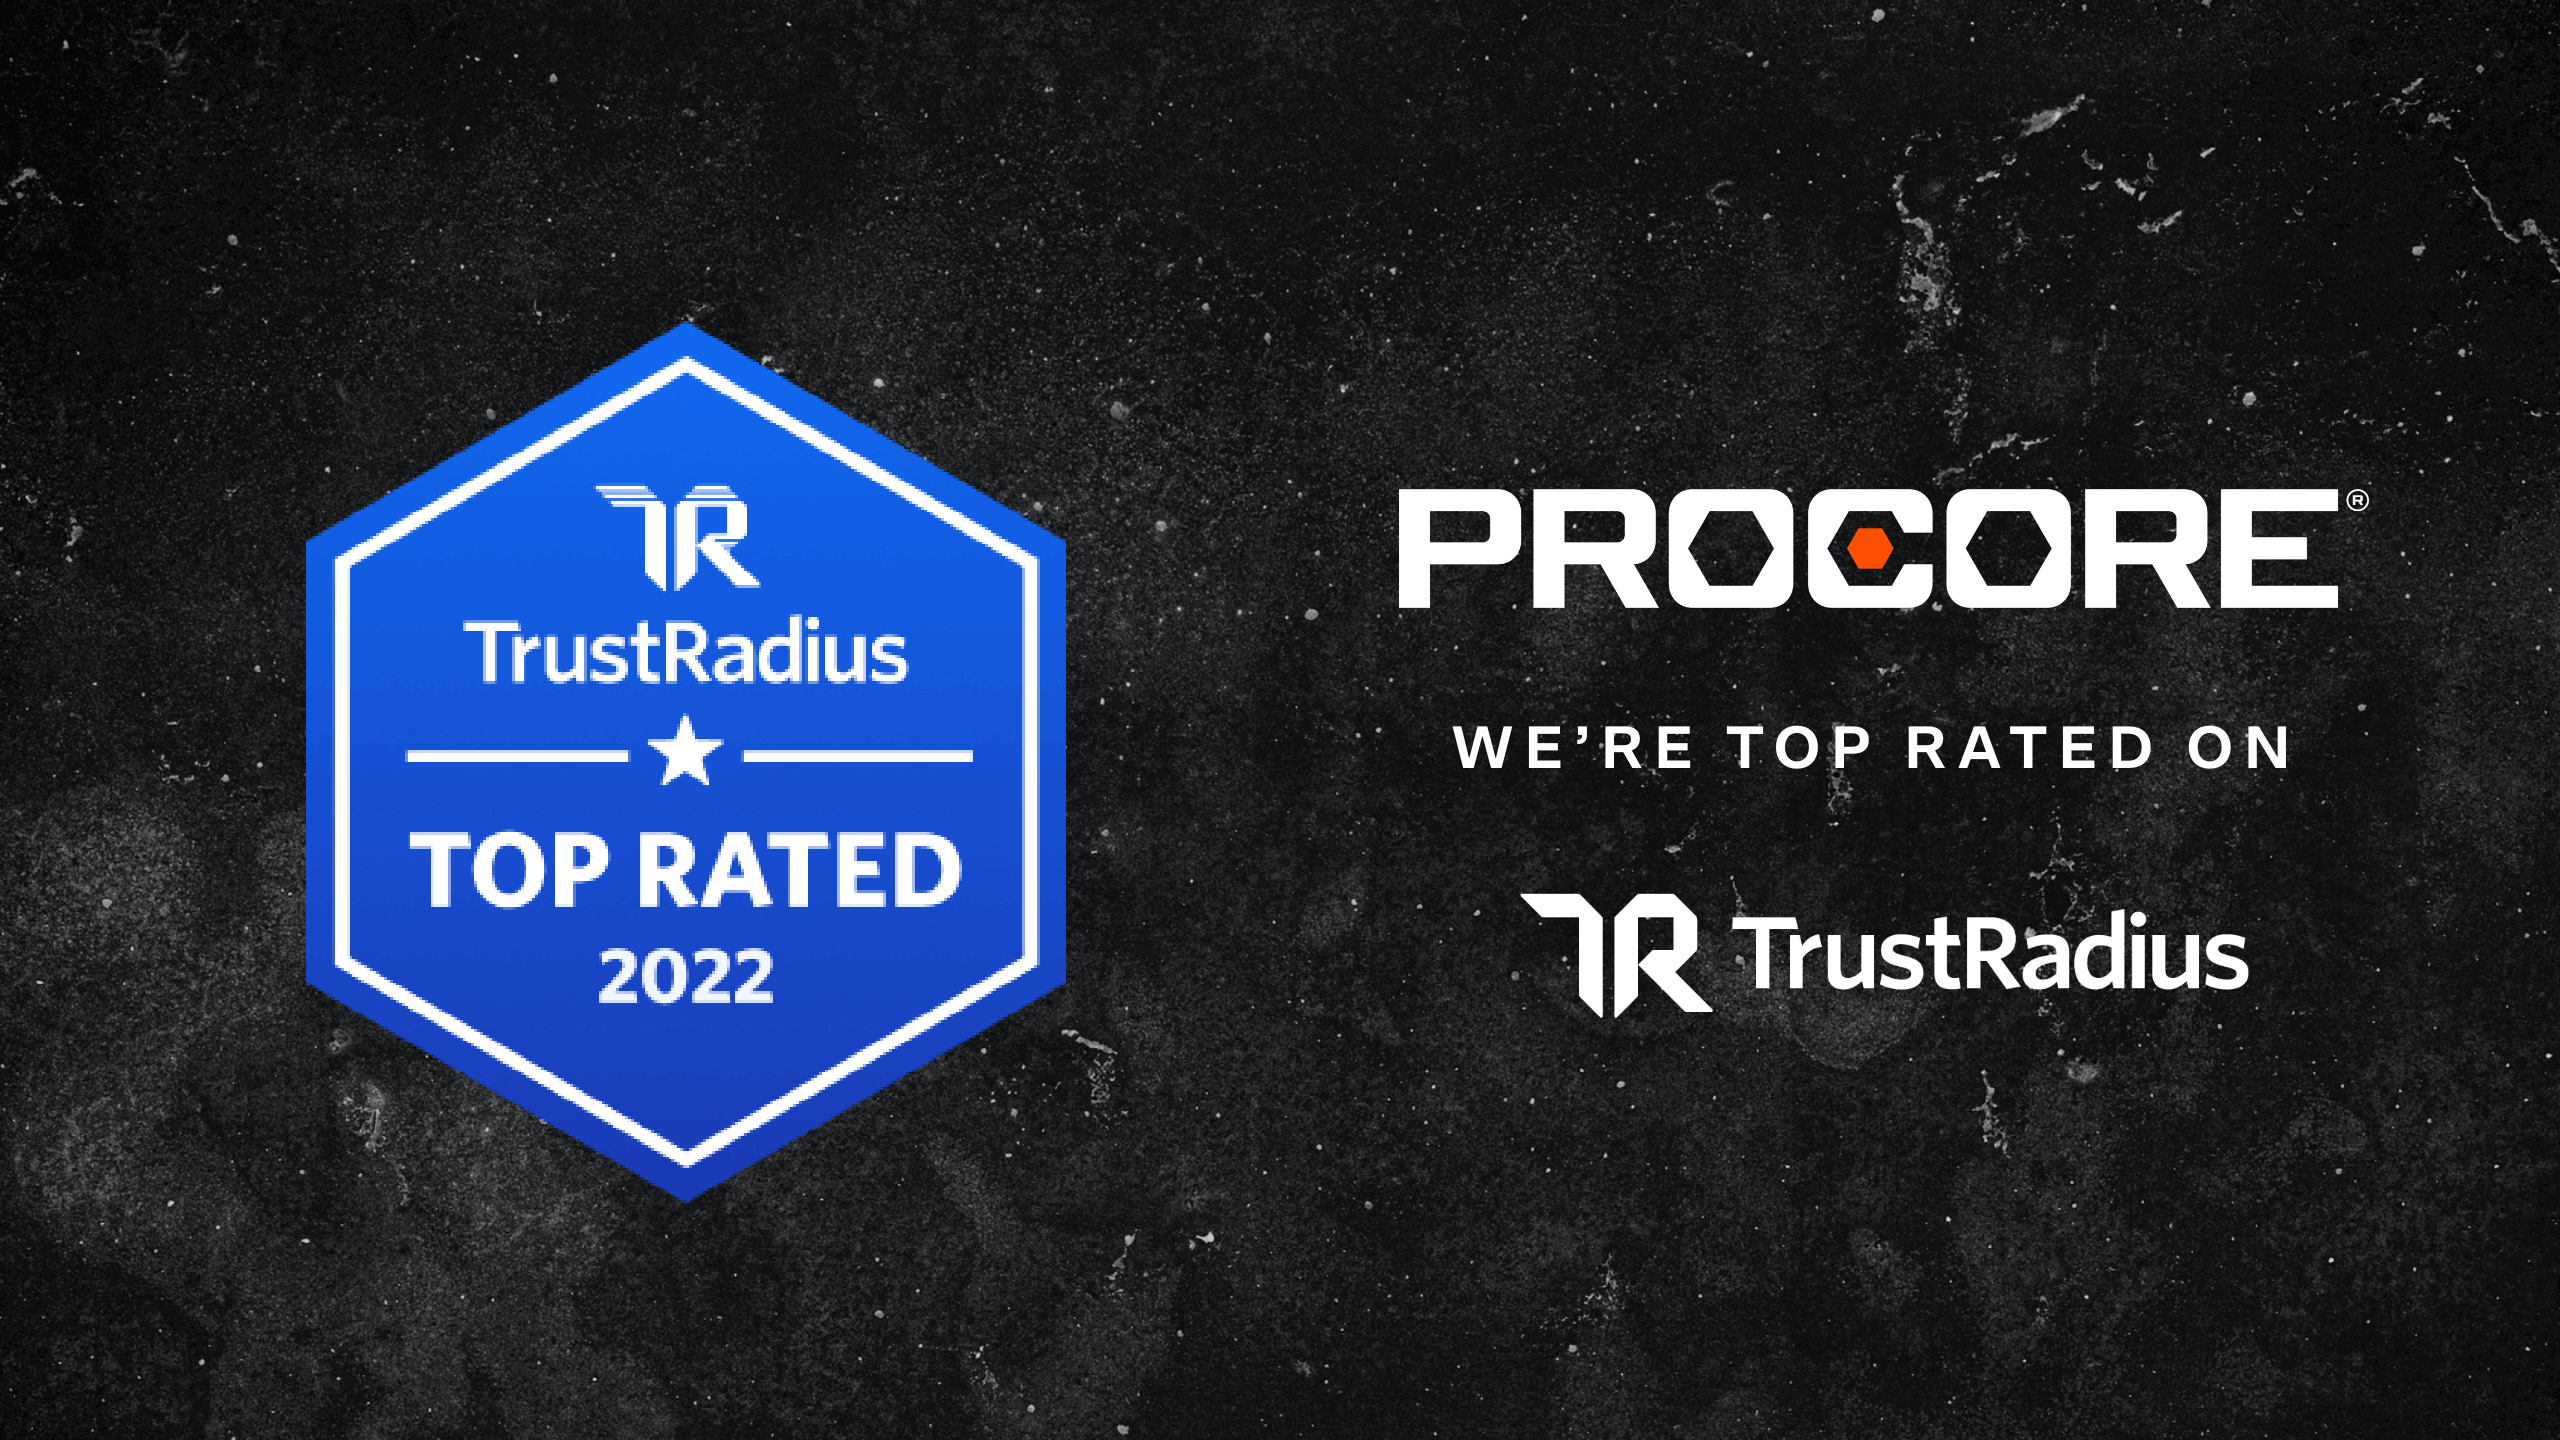 TrustRadius Top Rated Construction Product badge for Procore